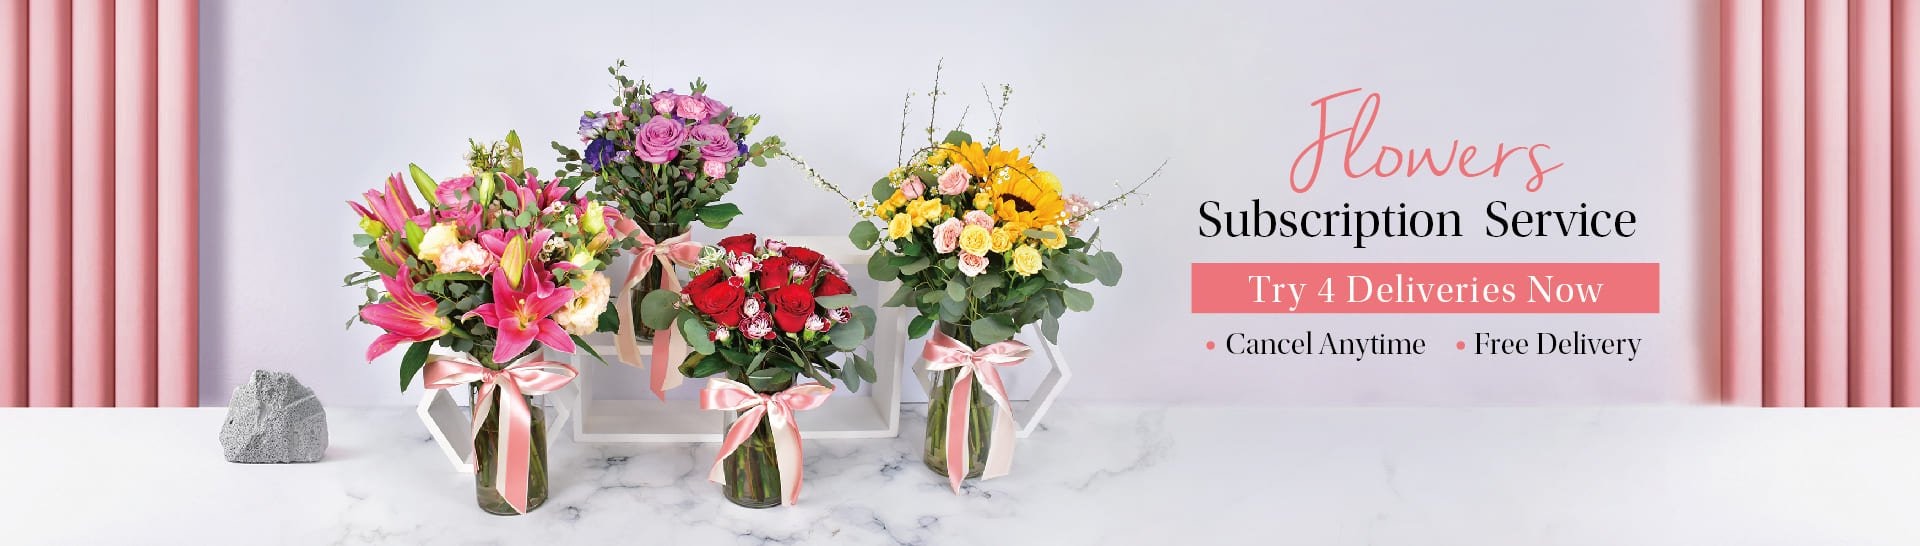 Gift Flowers - Flower Subscription service